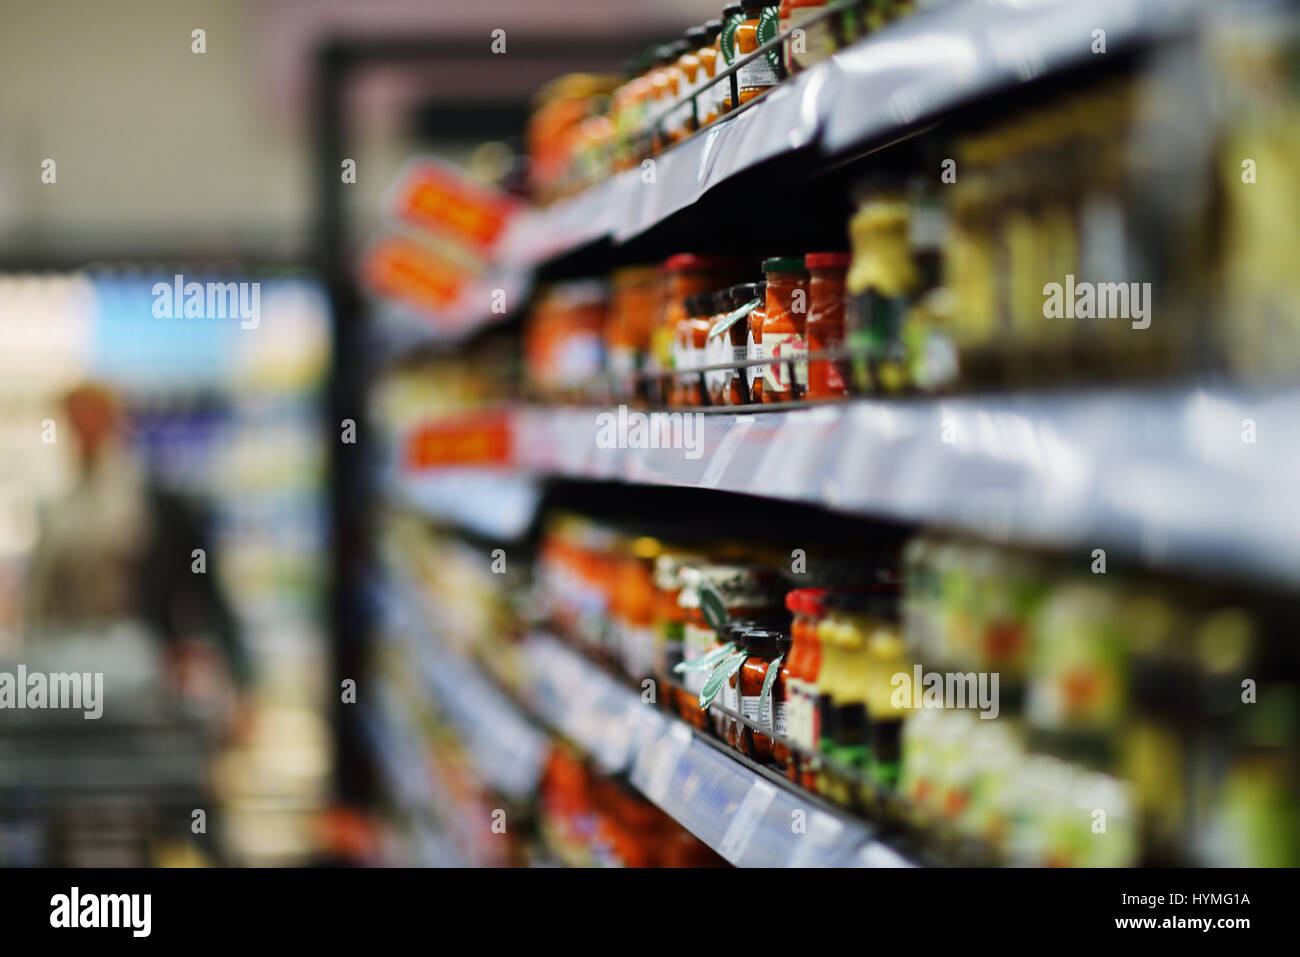 Woman shopping dairy product in grocery store Stock Photo - Alamy